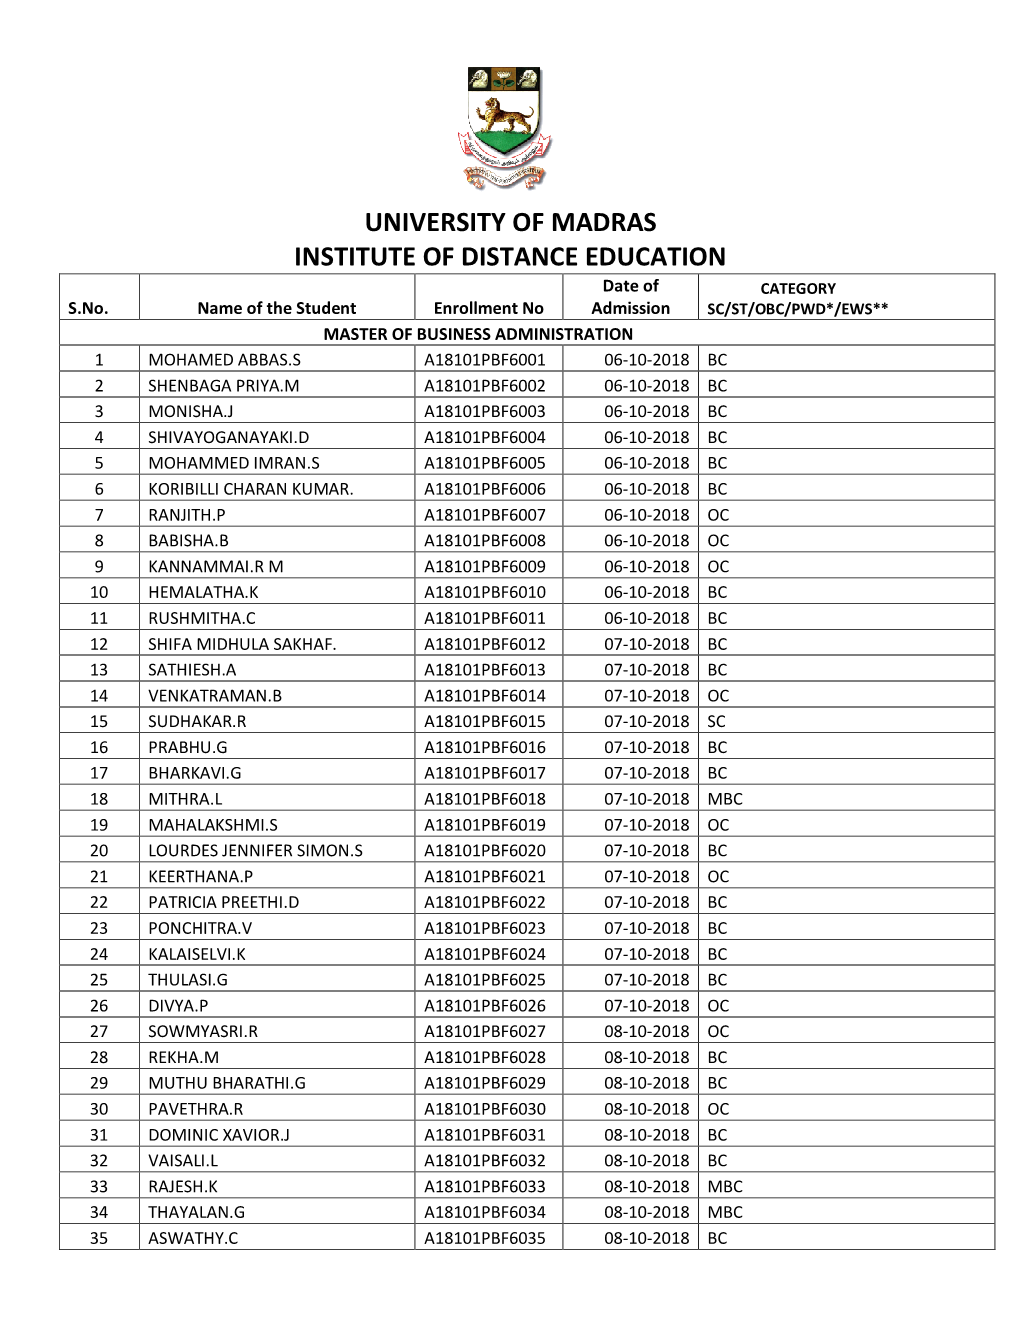 UNIVERSITY of MADRAS INSTITUTE of DISTANCE EDUCATION Date of CATEGORY S.No